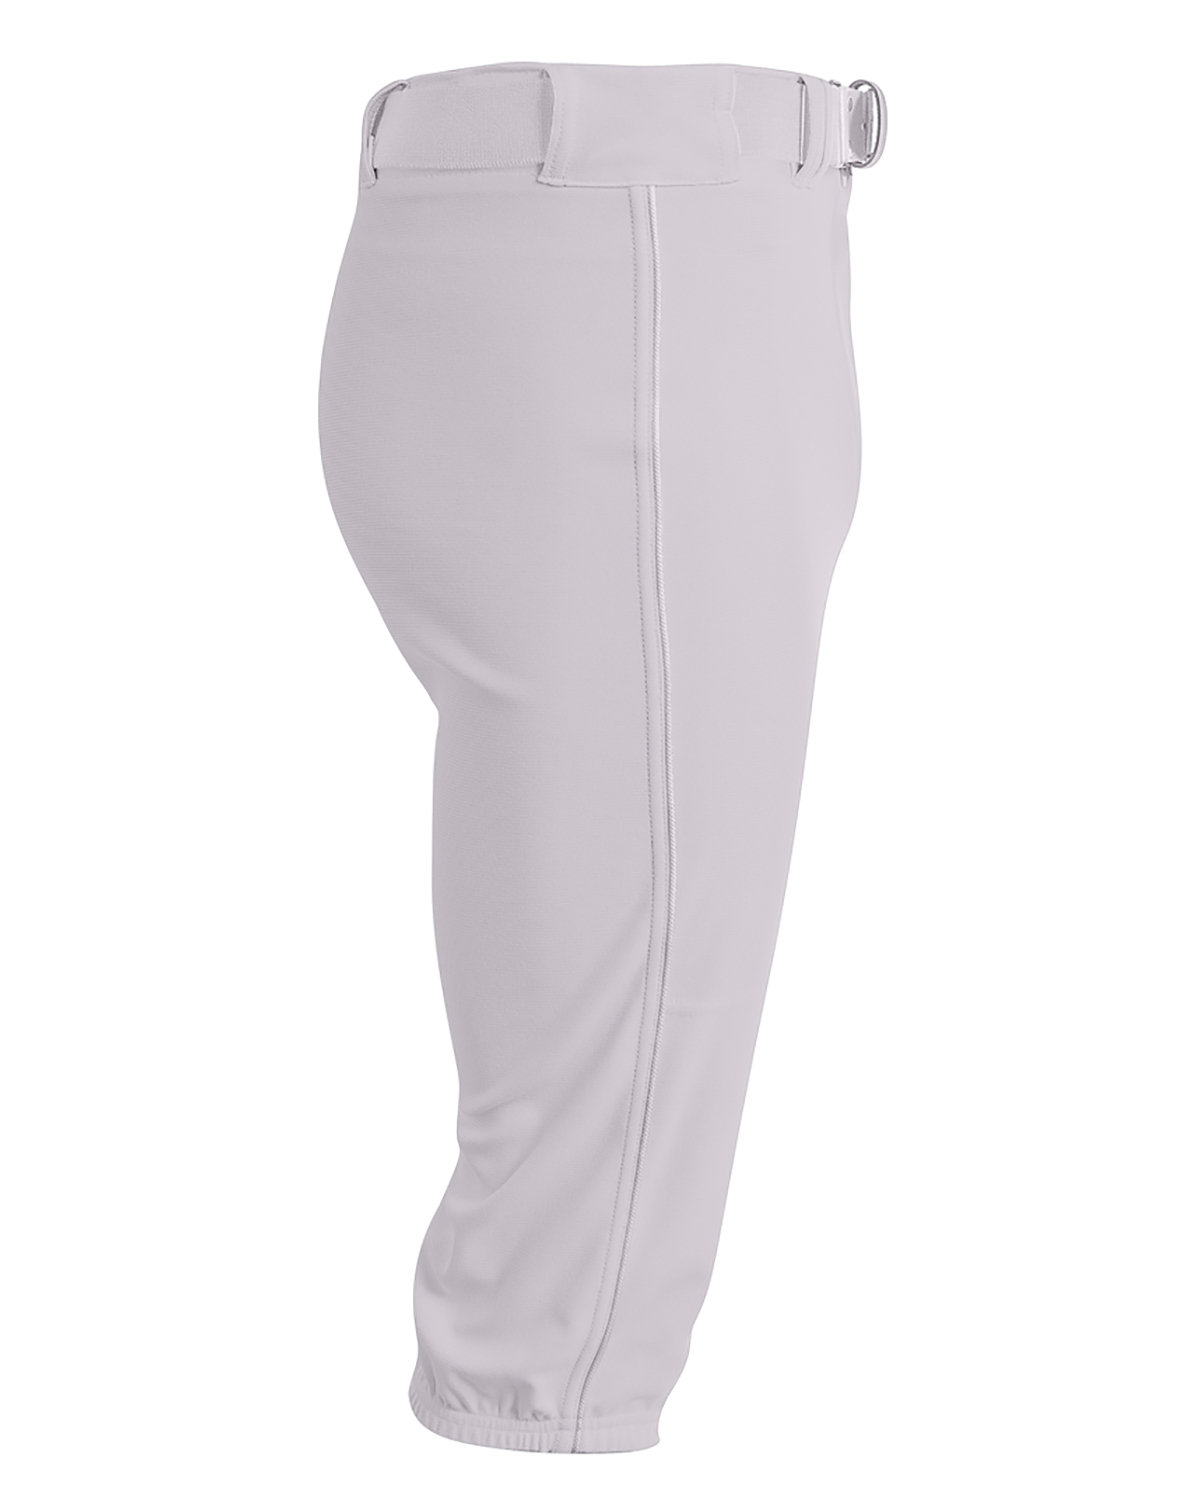 Buy Youth Baseball Knicker Pant - A4 Online at Best price - IL